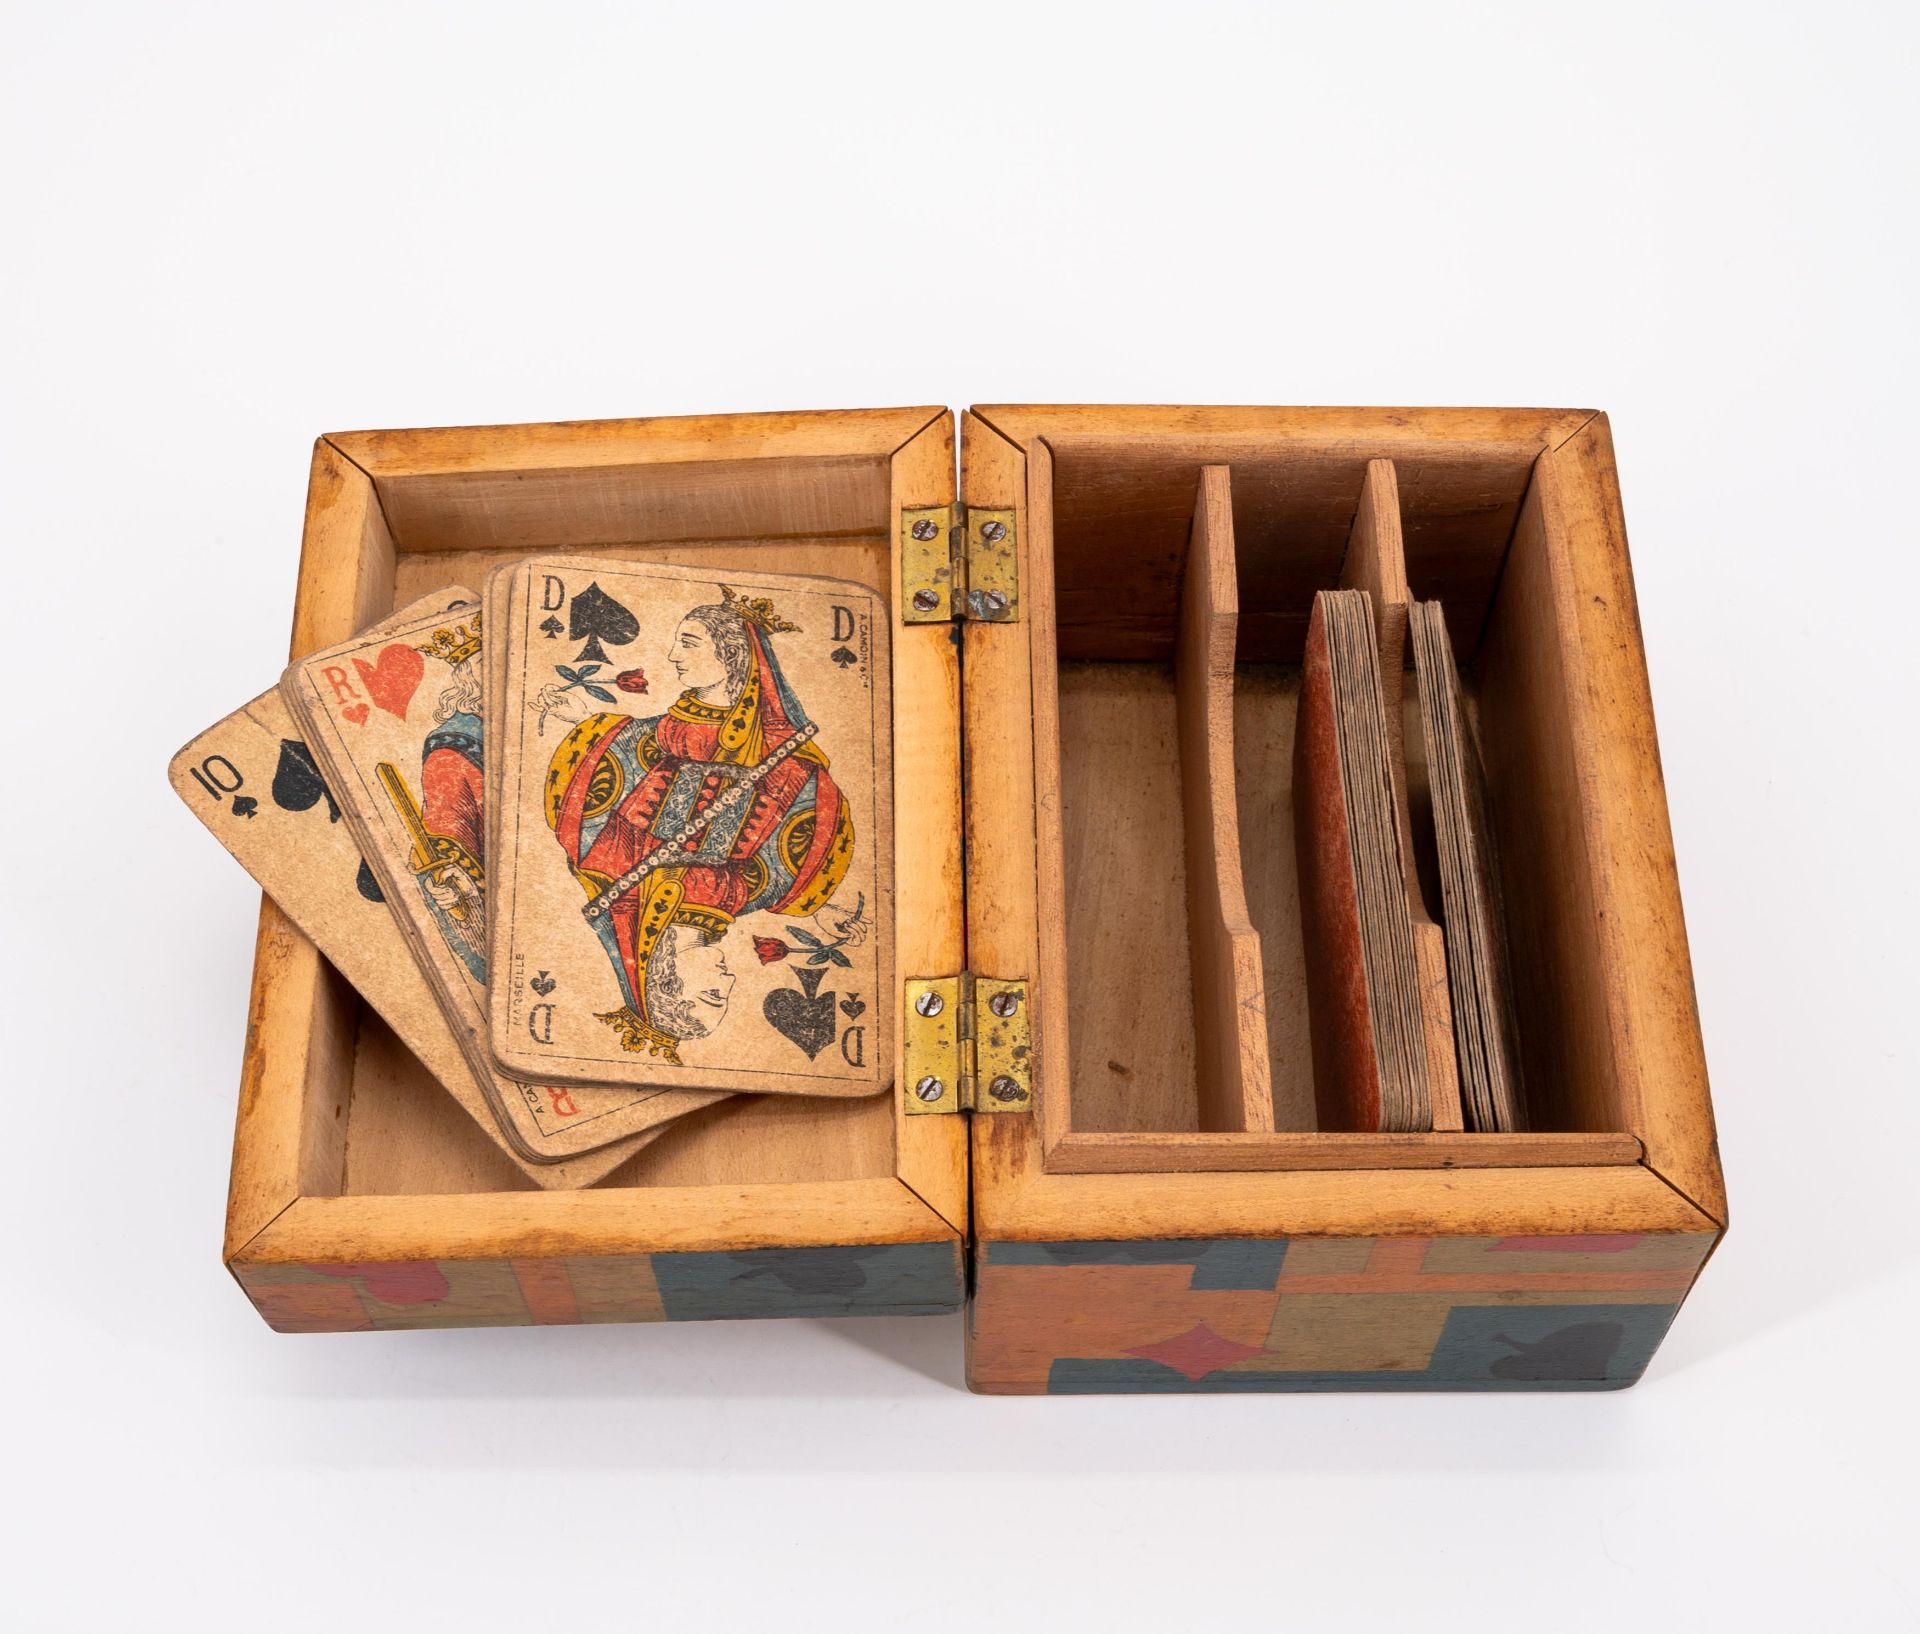 Germany: MINIATURE WOODEN GAME BOX, SET OF GLASS MARBLES AND PLAYING CARD BOX - Image 4 of 5